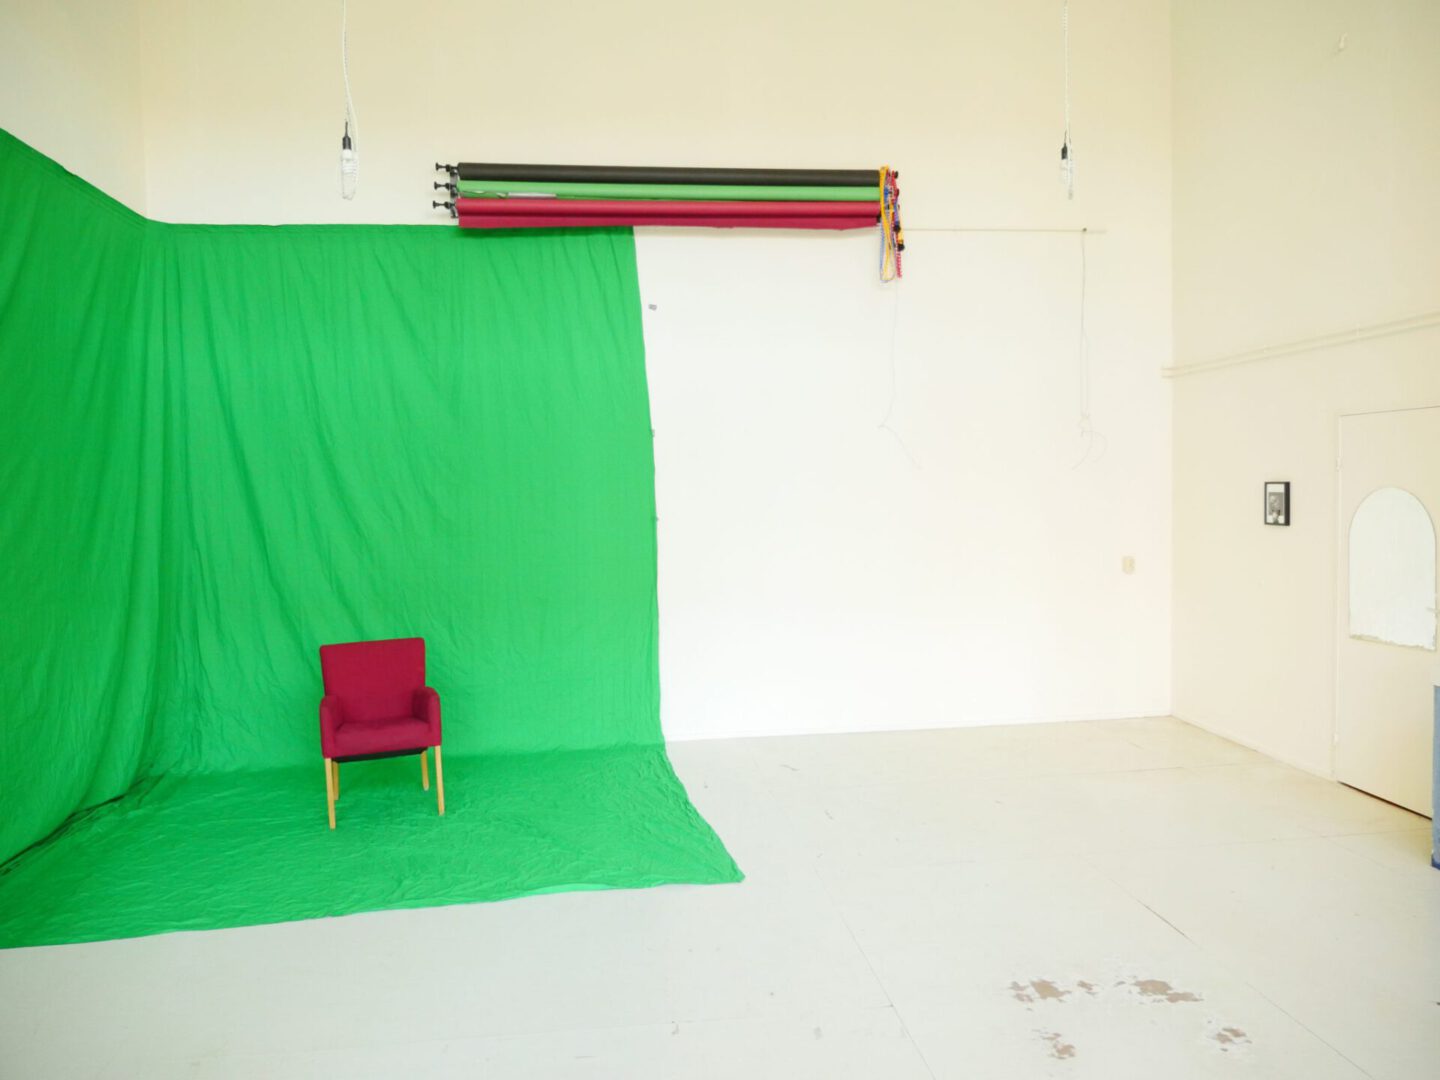 Large Green Screen Studio for video and photo shoots B - Breed Art Studios Amsterdam Noord P1200293